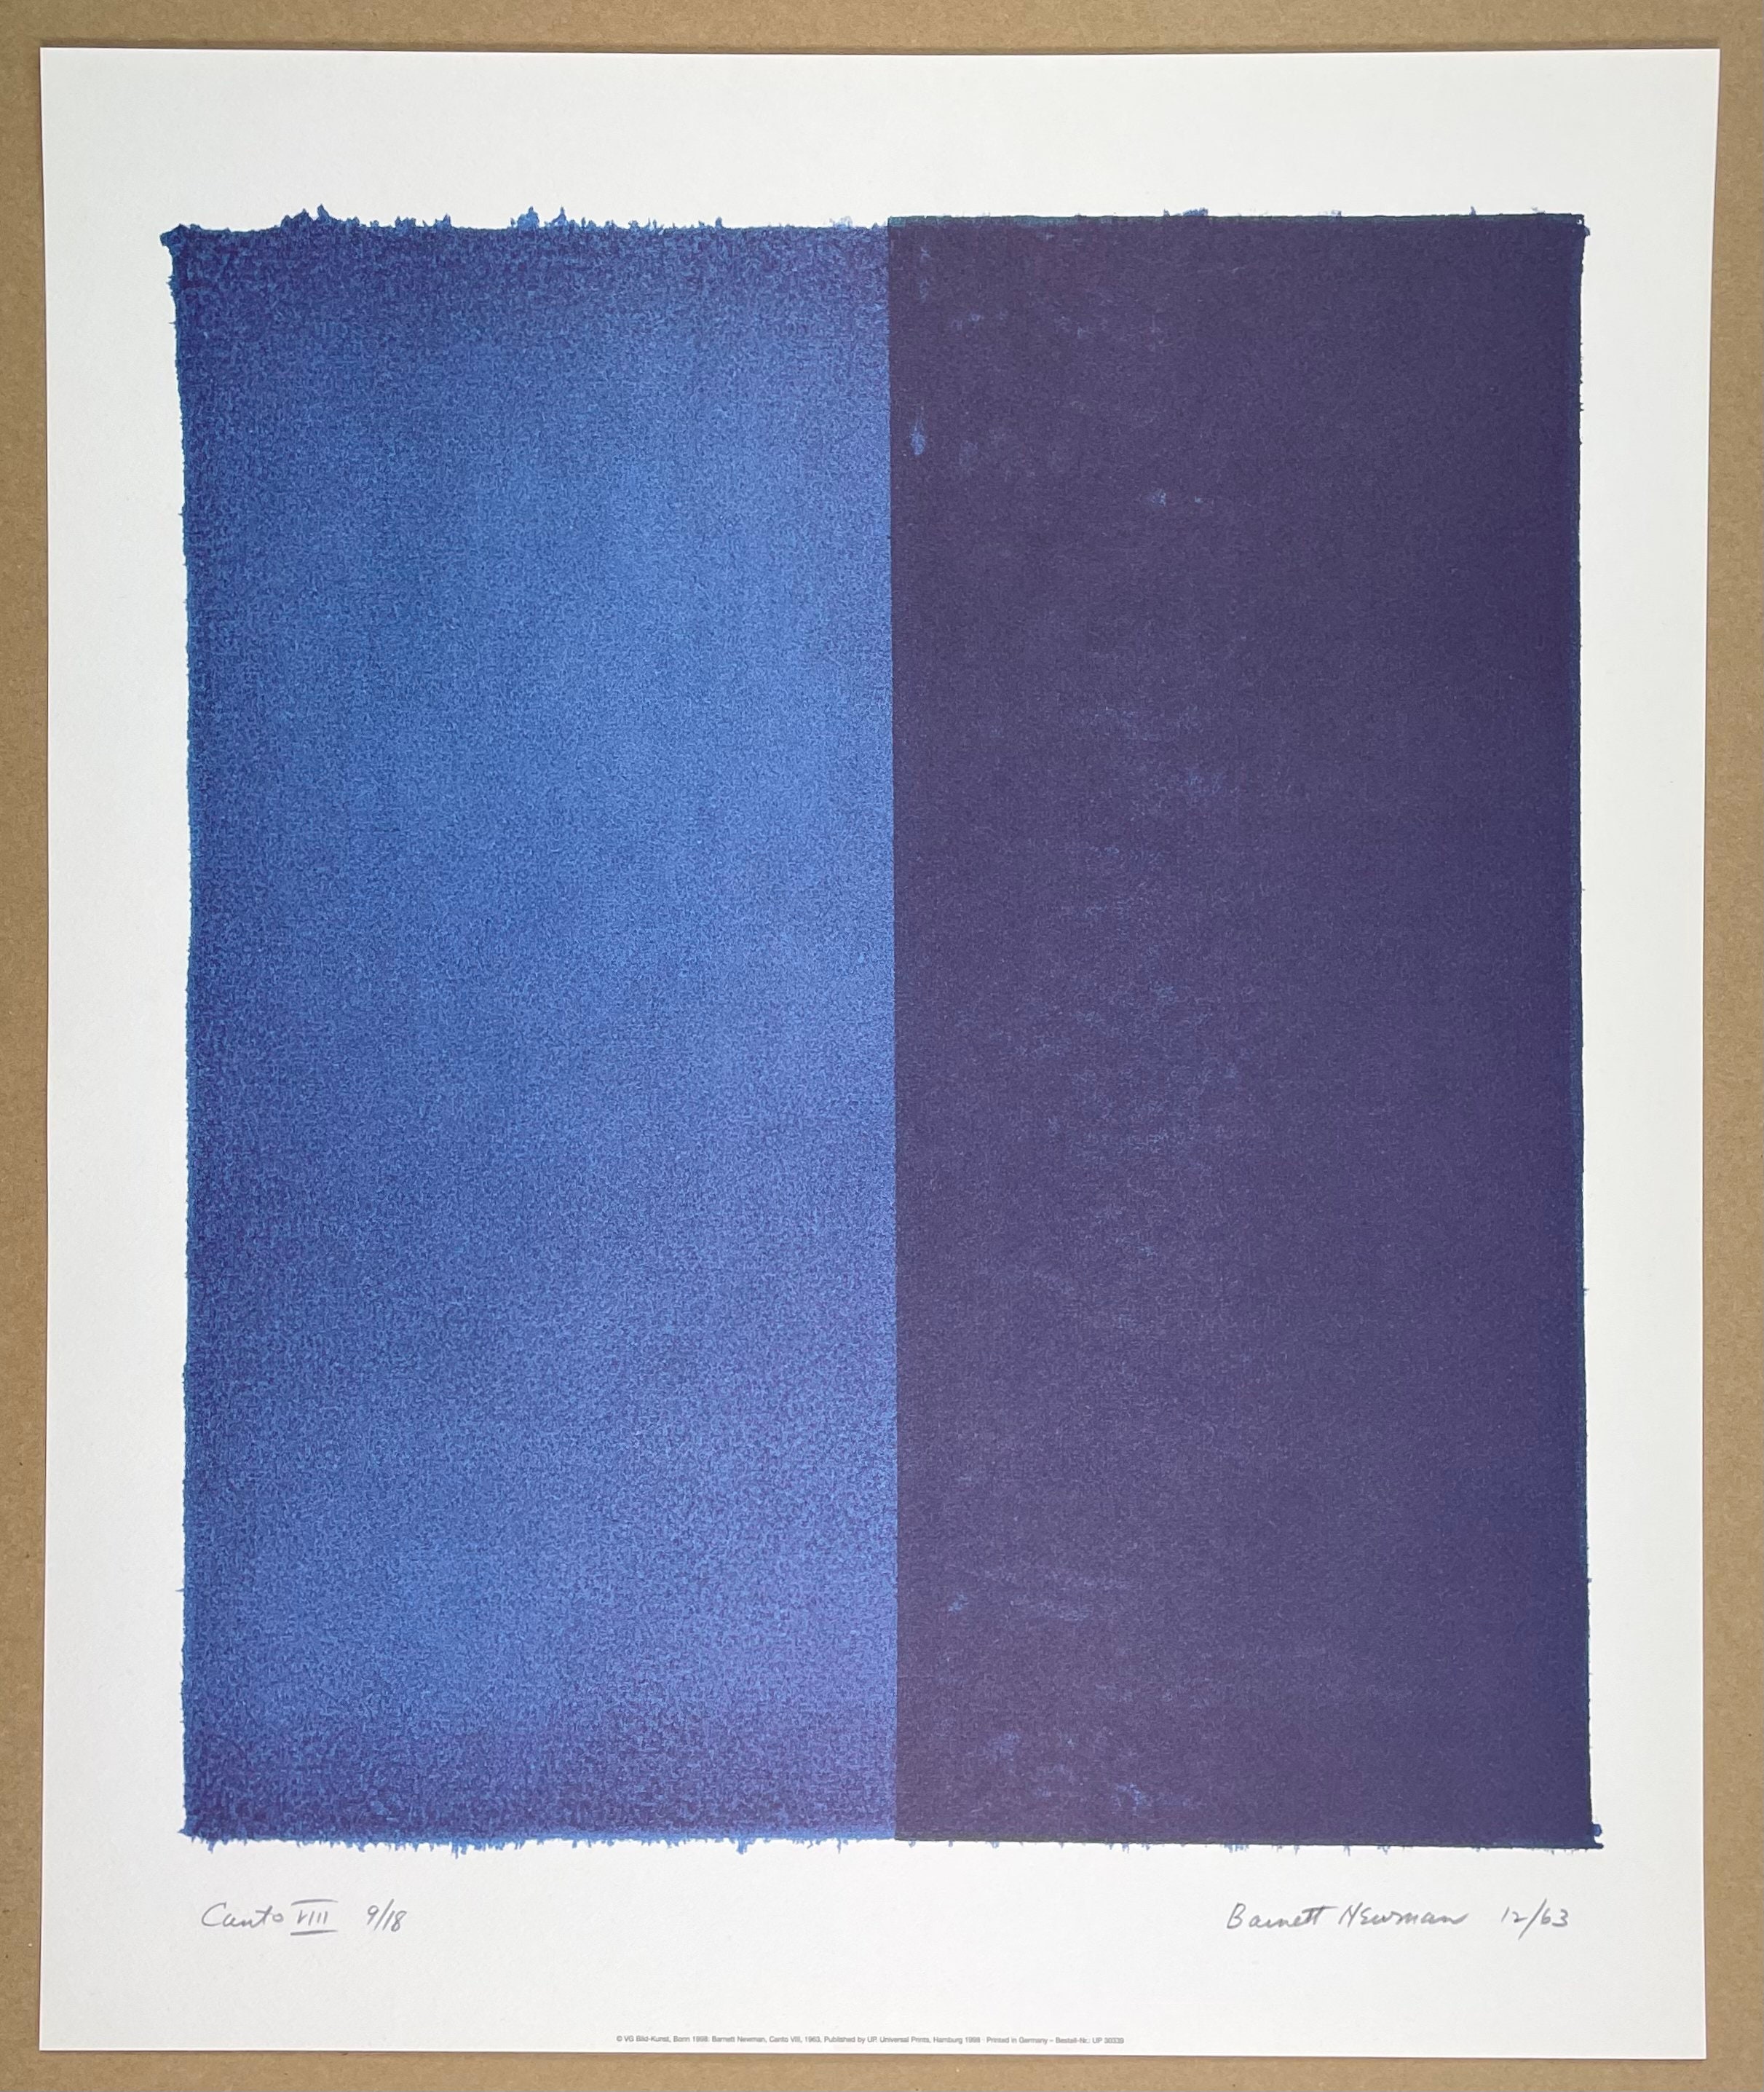 Barnett Newman exhibition poster - Canto VIII - museum artist - art print -  abstract expressionism - 1998